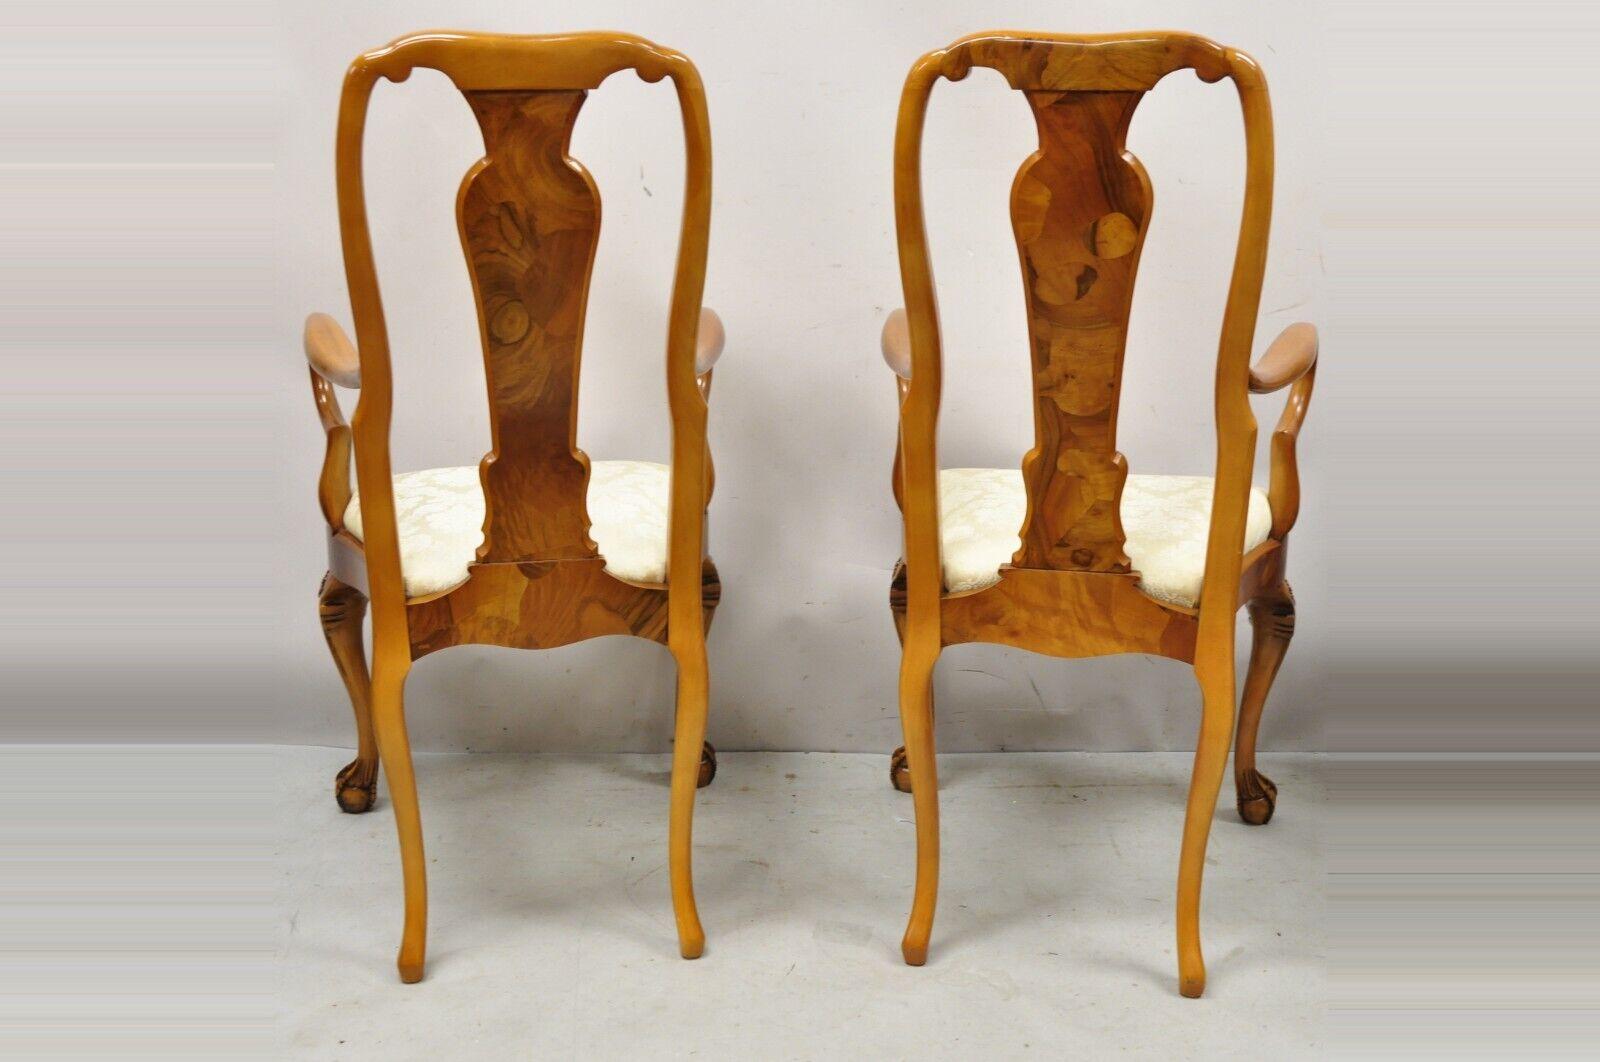 Vintage Queen Anne Style Italian Burl Patchwork Floral Inlay Arm Chairs, Pair For Sale 5